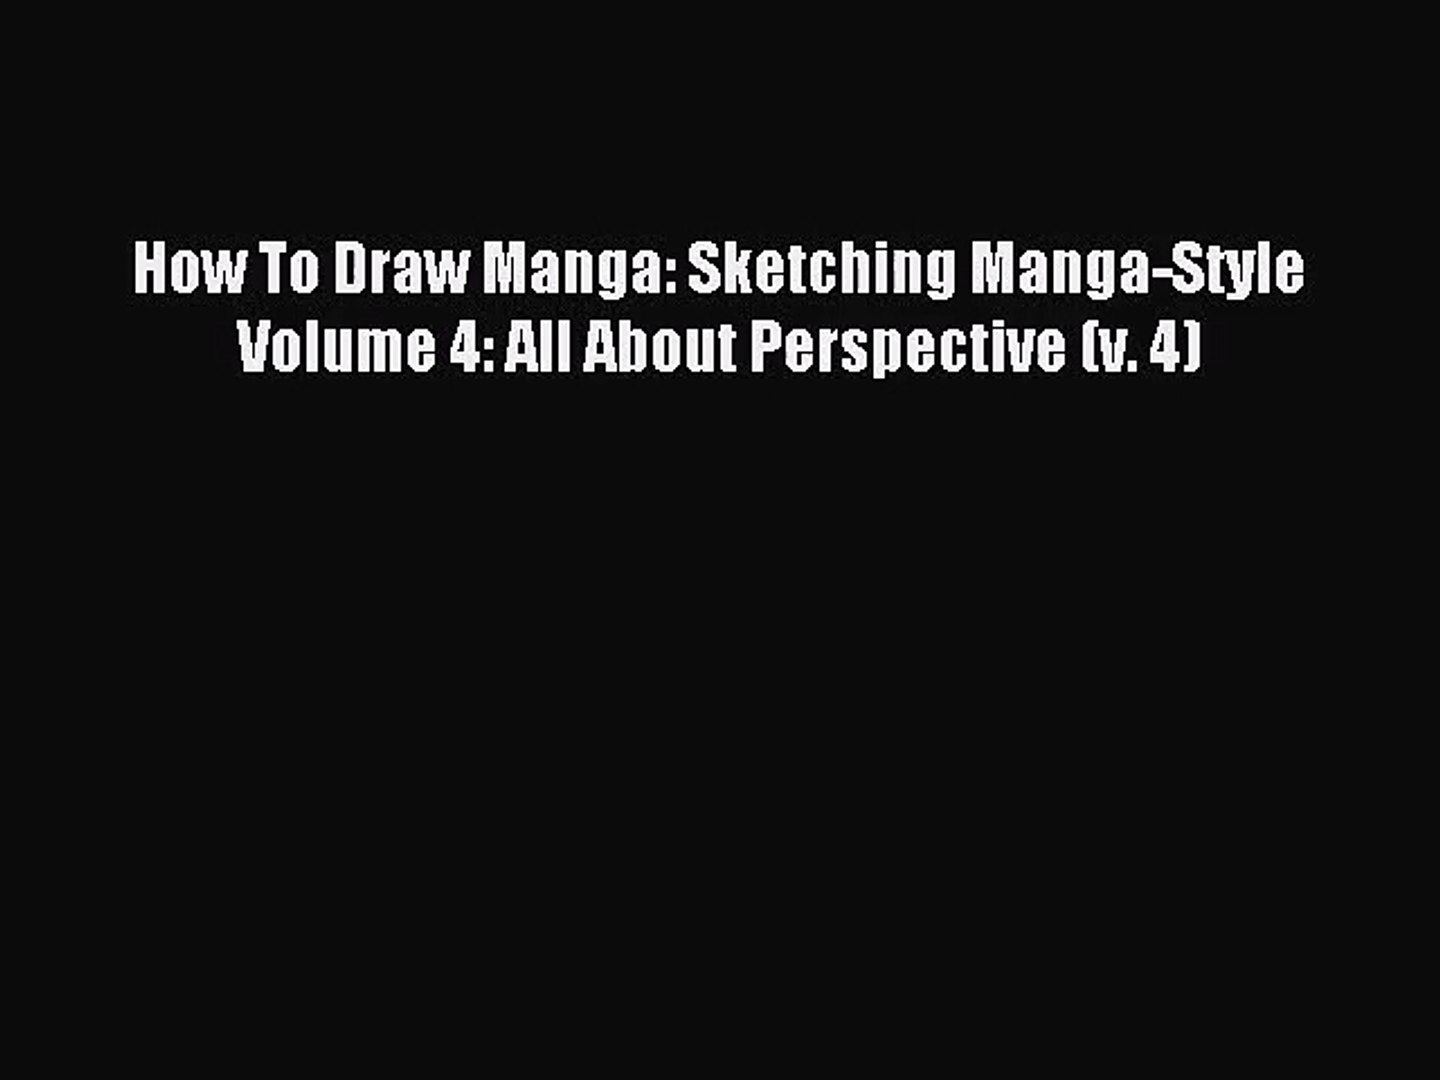 Sketching Manga-Style Volume 1 Sketching As Composition Planning How To Draw Manga